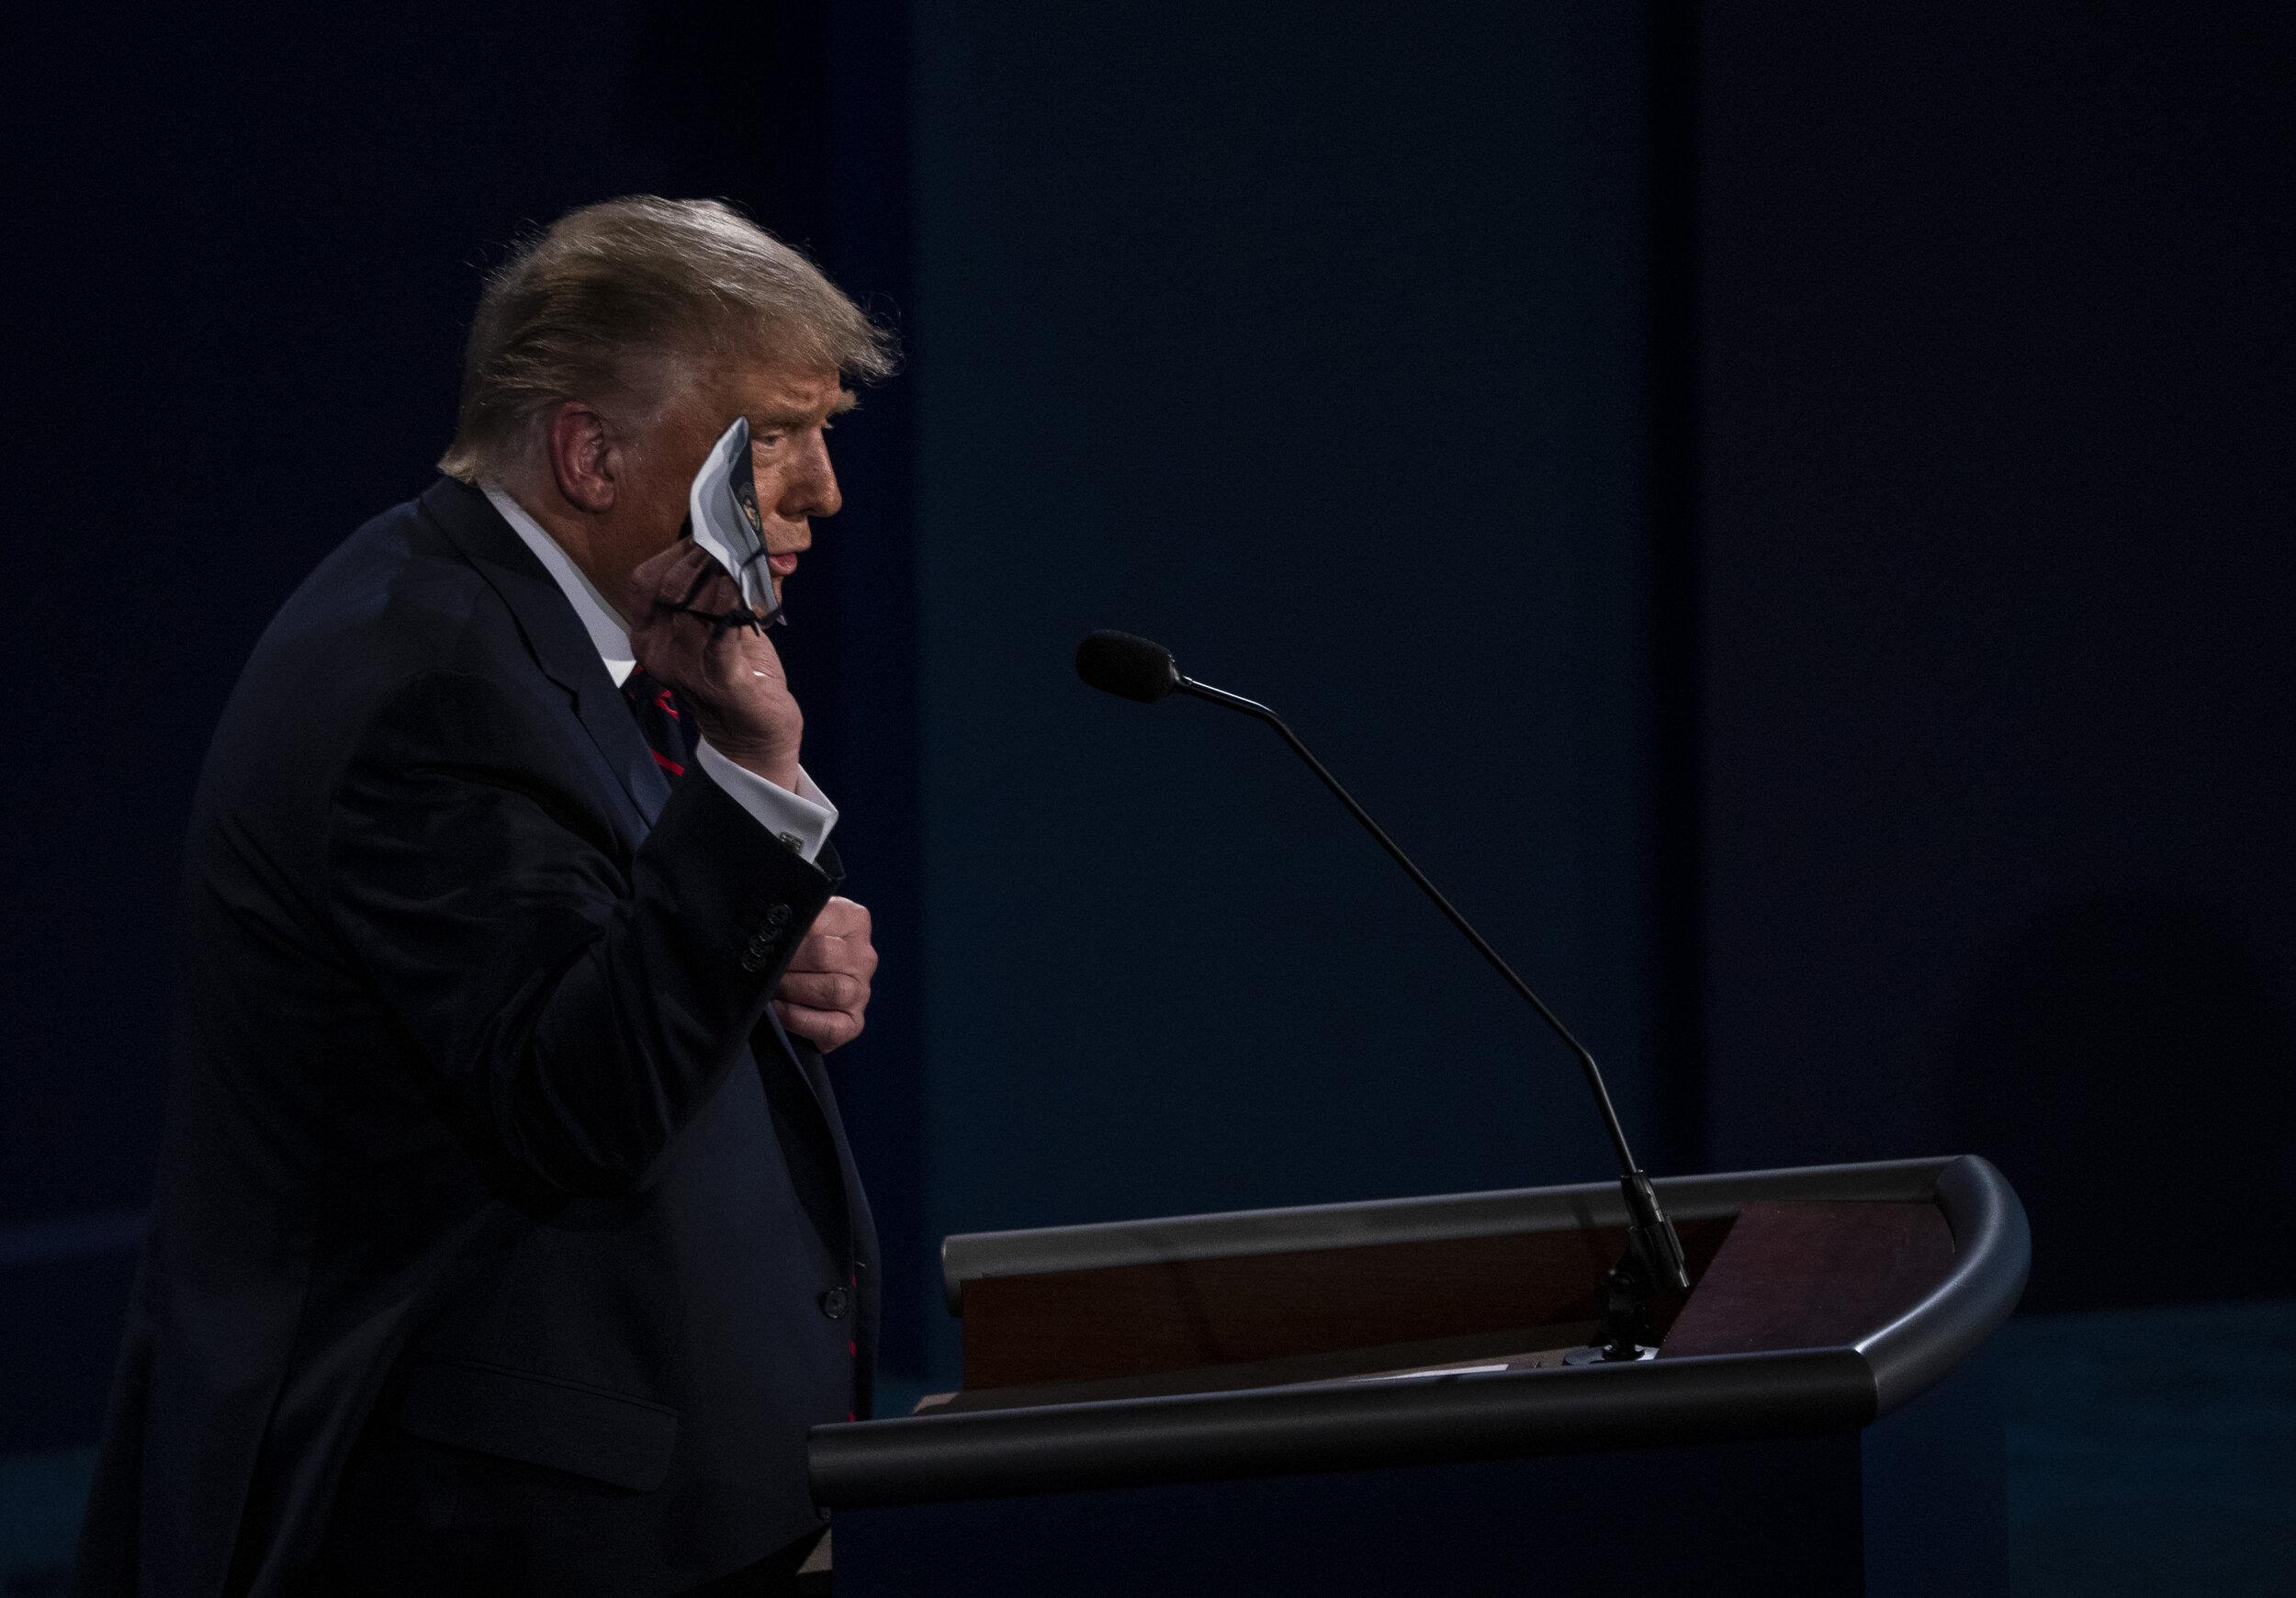  President Donald Trump holds up his facemask while criticizing his opponent, former Vice President Joe Biden, for not holding rallies and for always attending public appearances with a mask during the first presidential debate held at Case Western U